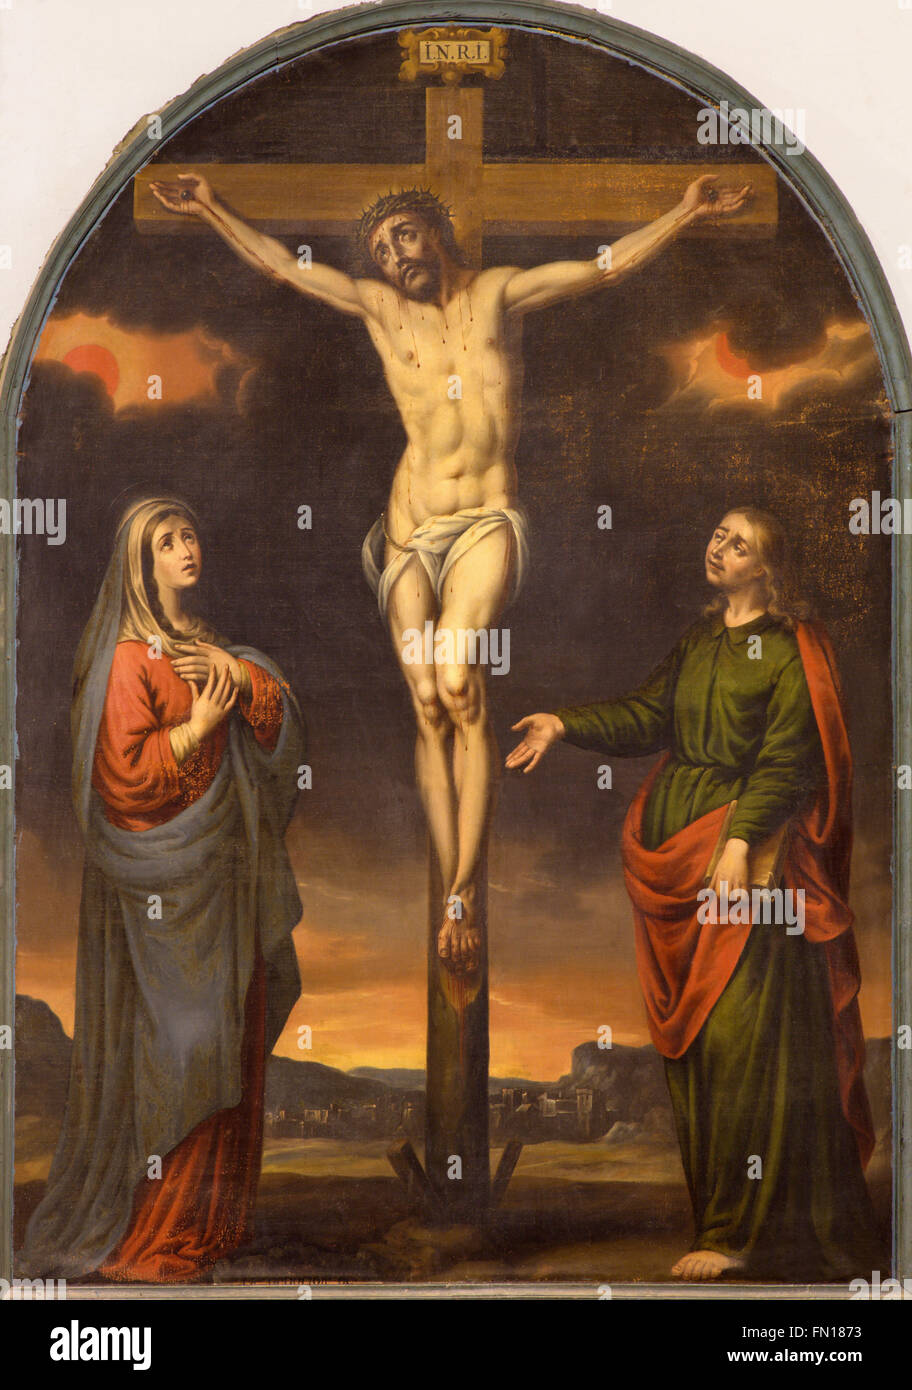 GRANADA, SPAIN - MAY 29, 2015: The Crucifixion paint in the church Monasterio de San Jeronimo by by unknown artist of 17. cent. Stock Photo